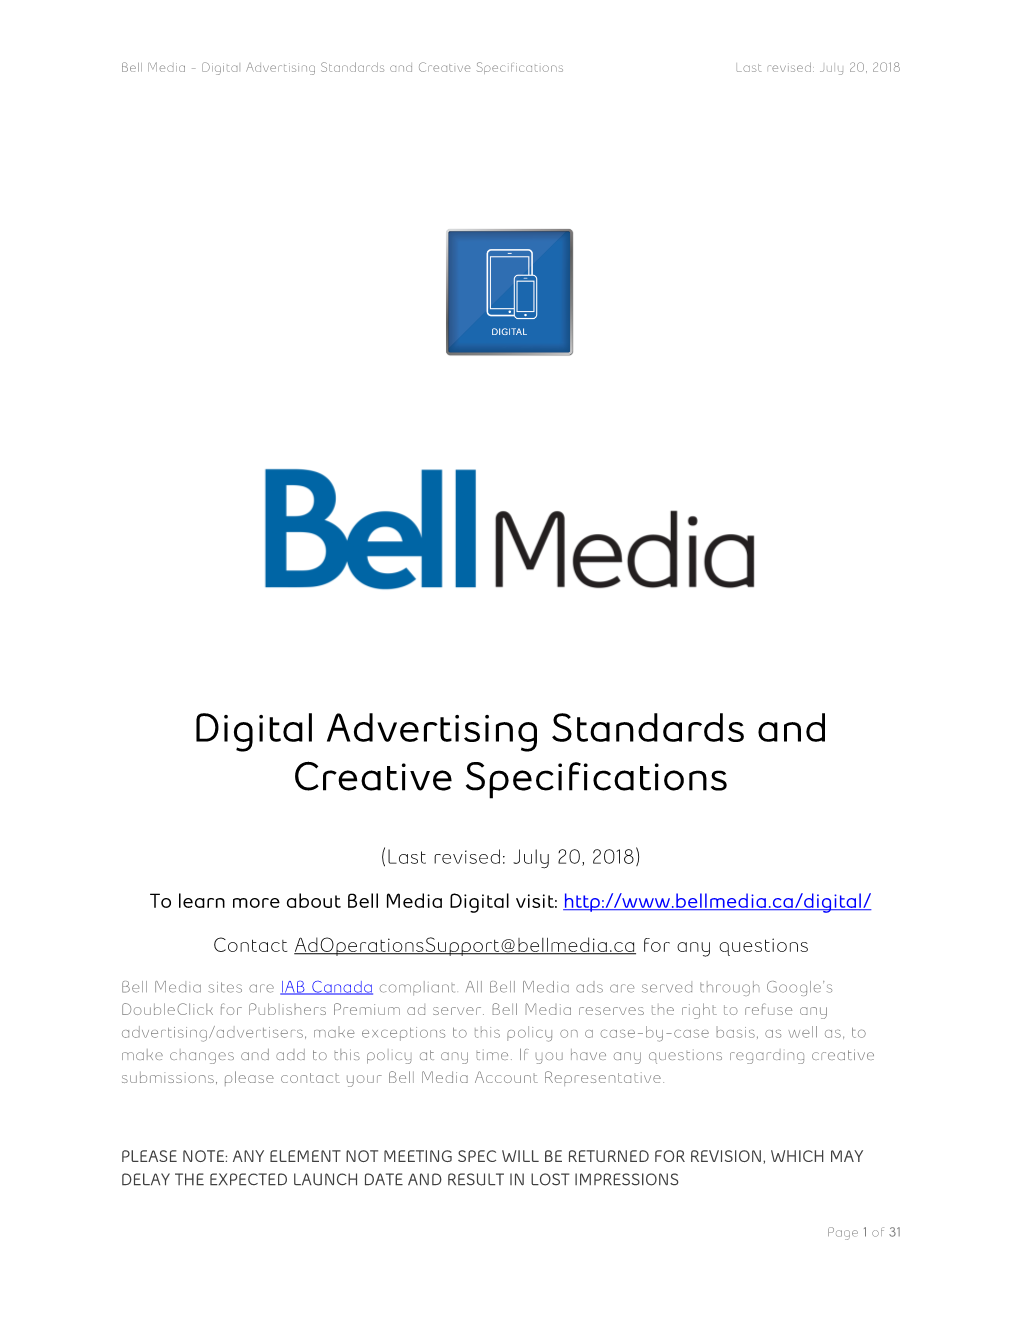 Digital Advertising Standards and Creative Specifications Last Revised: July 20, 2018